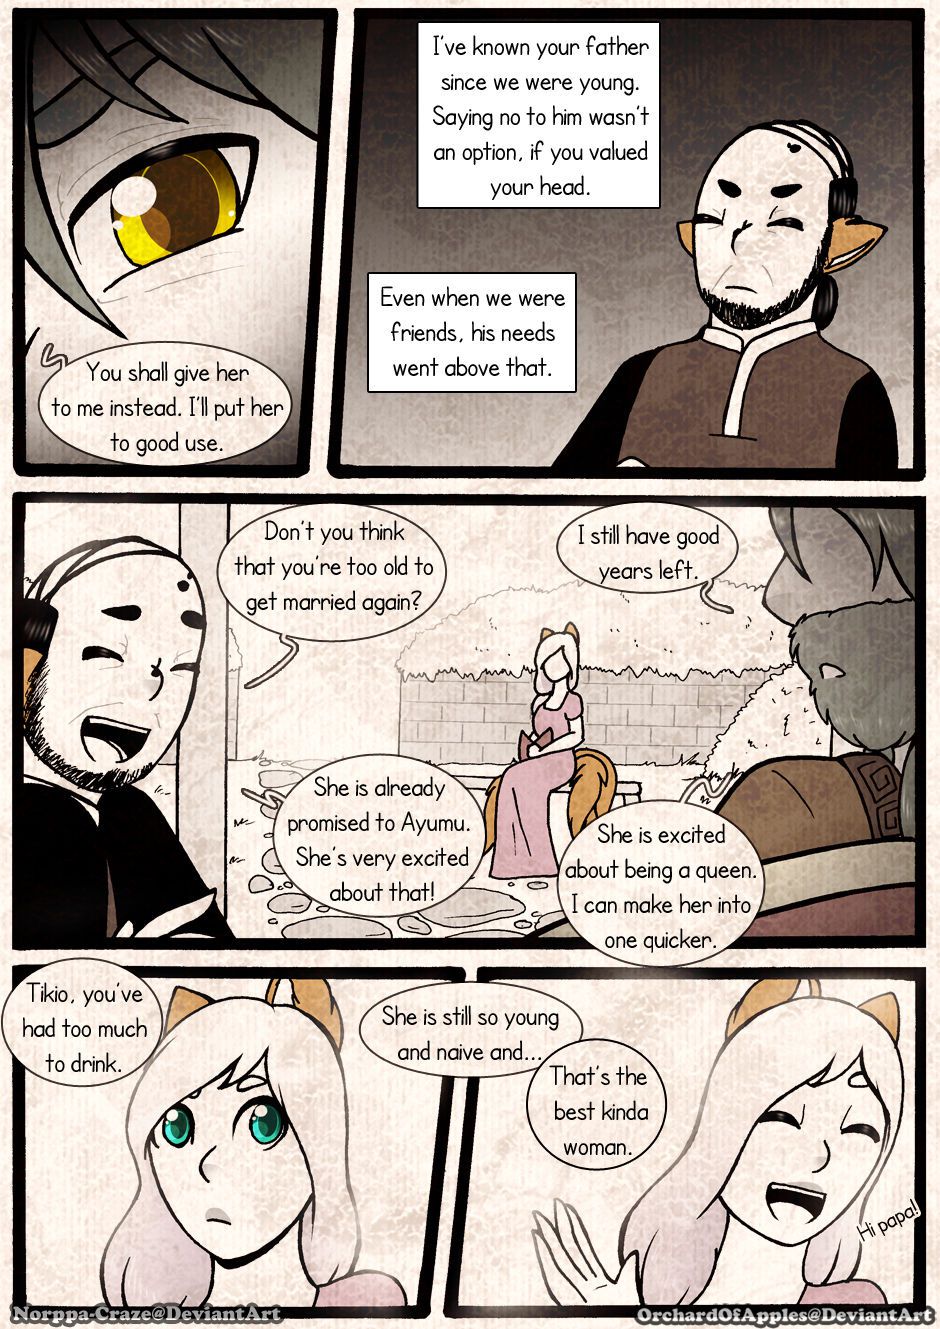 [Jeny-jen94] Between Kings and Queens [Ongoing] 293